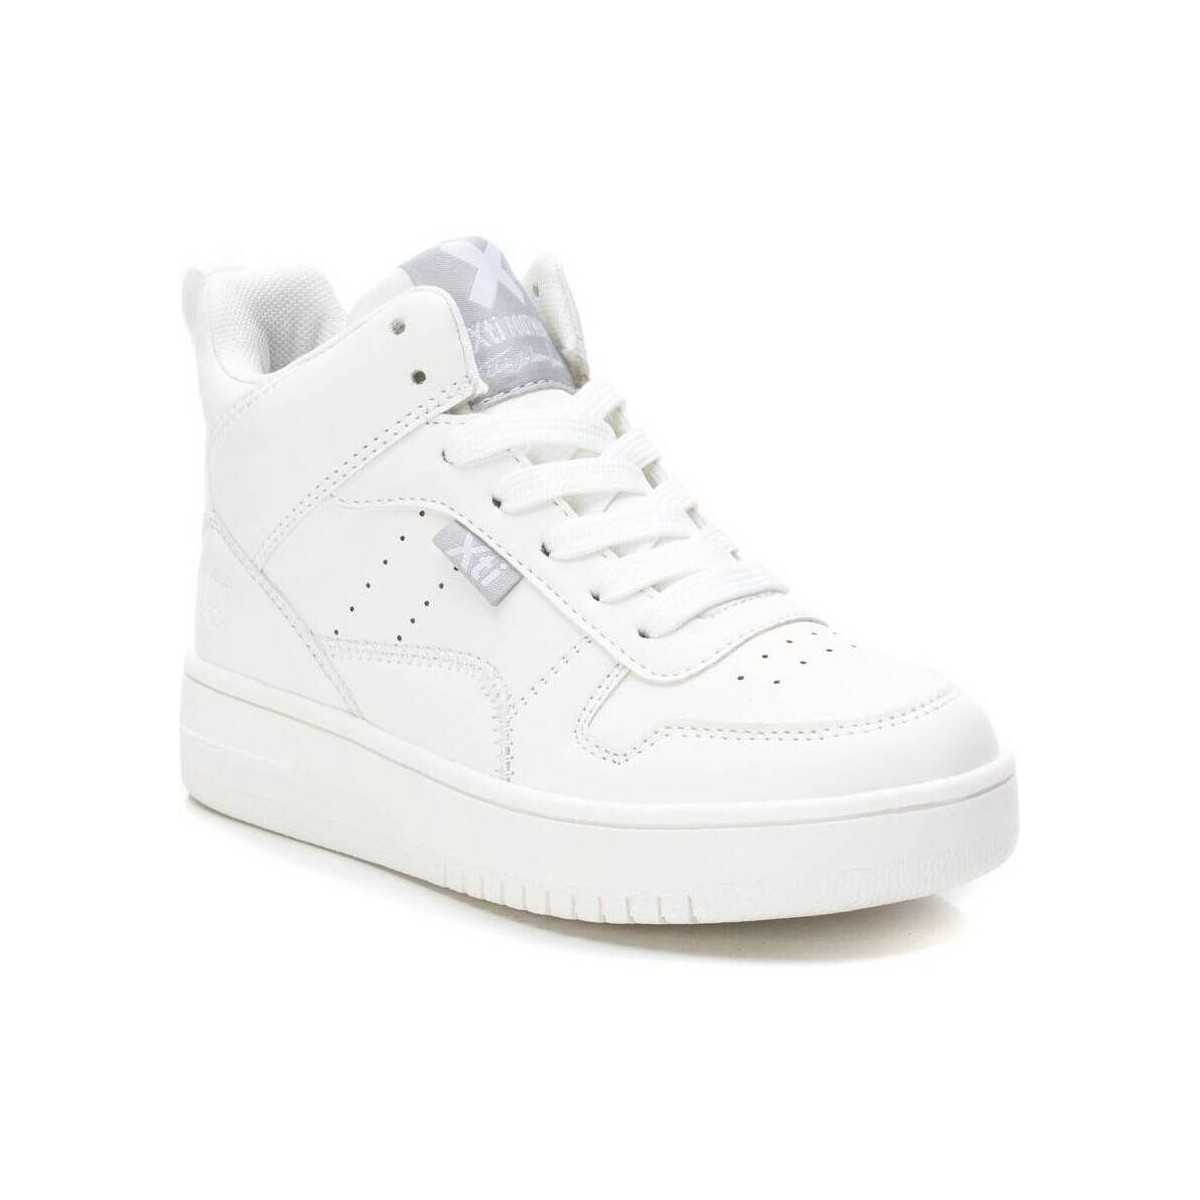 Chaussures Fille Baskets mode Xti 15053204 Blanc